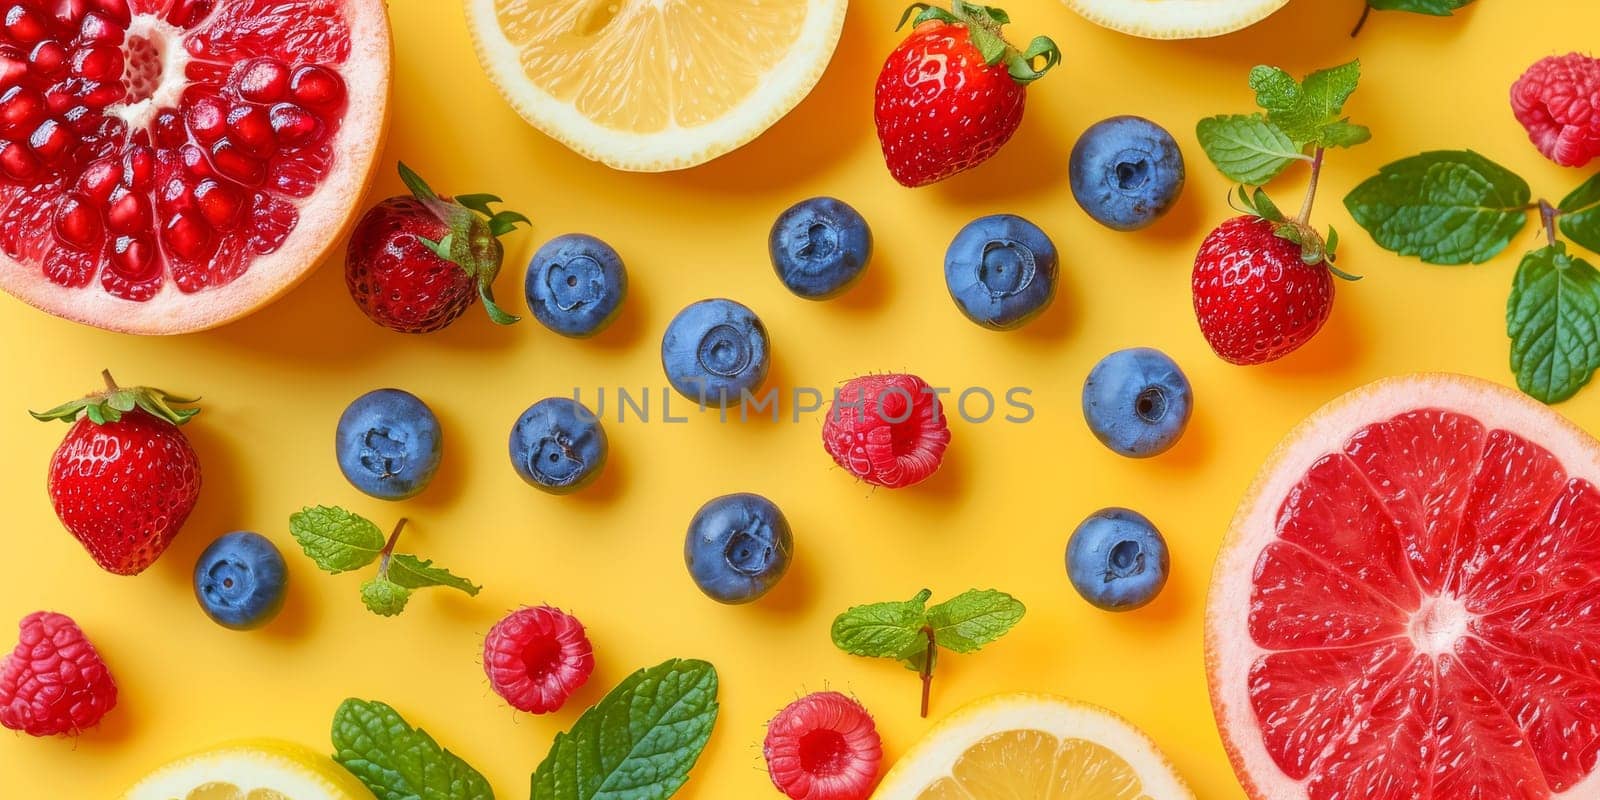 A colorful fruit salad with blueberries, raspberries, and oranges by itchaznong